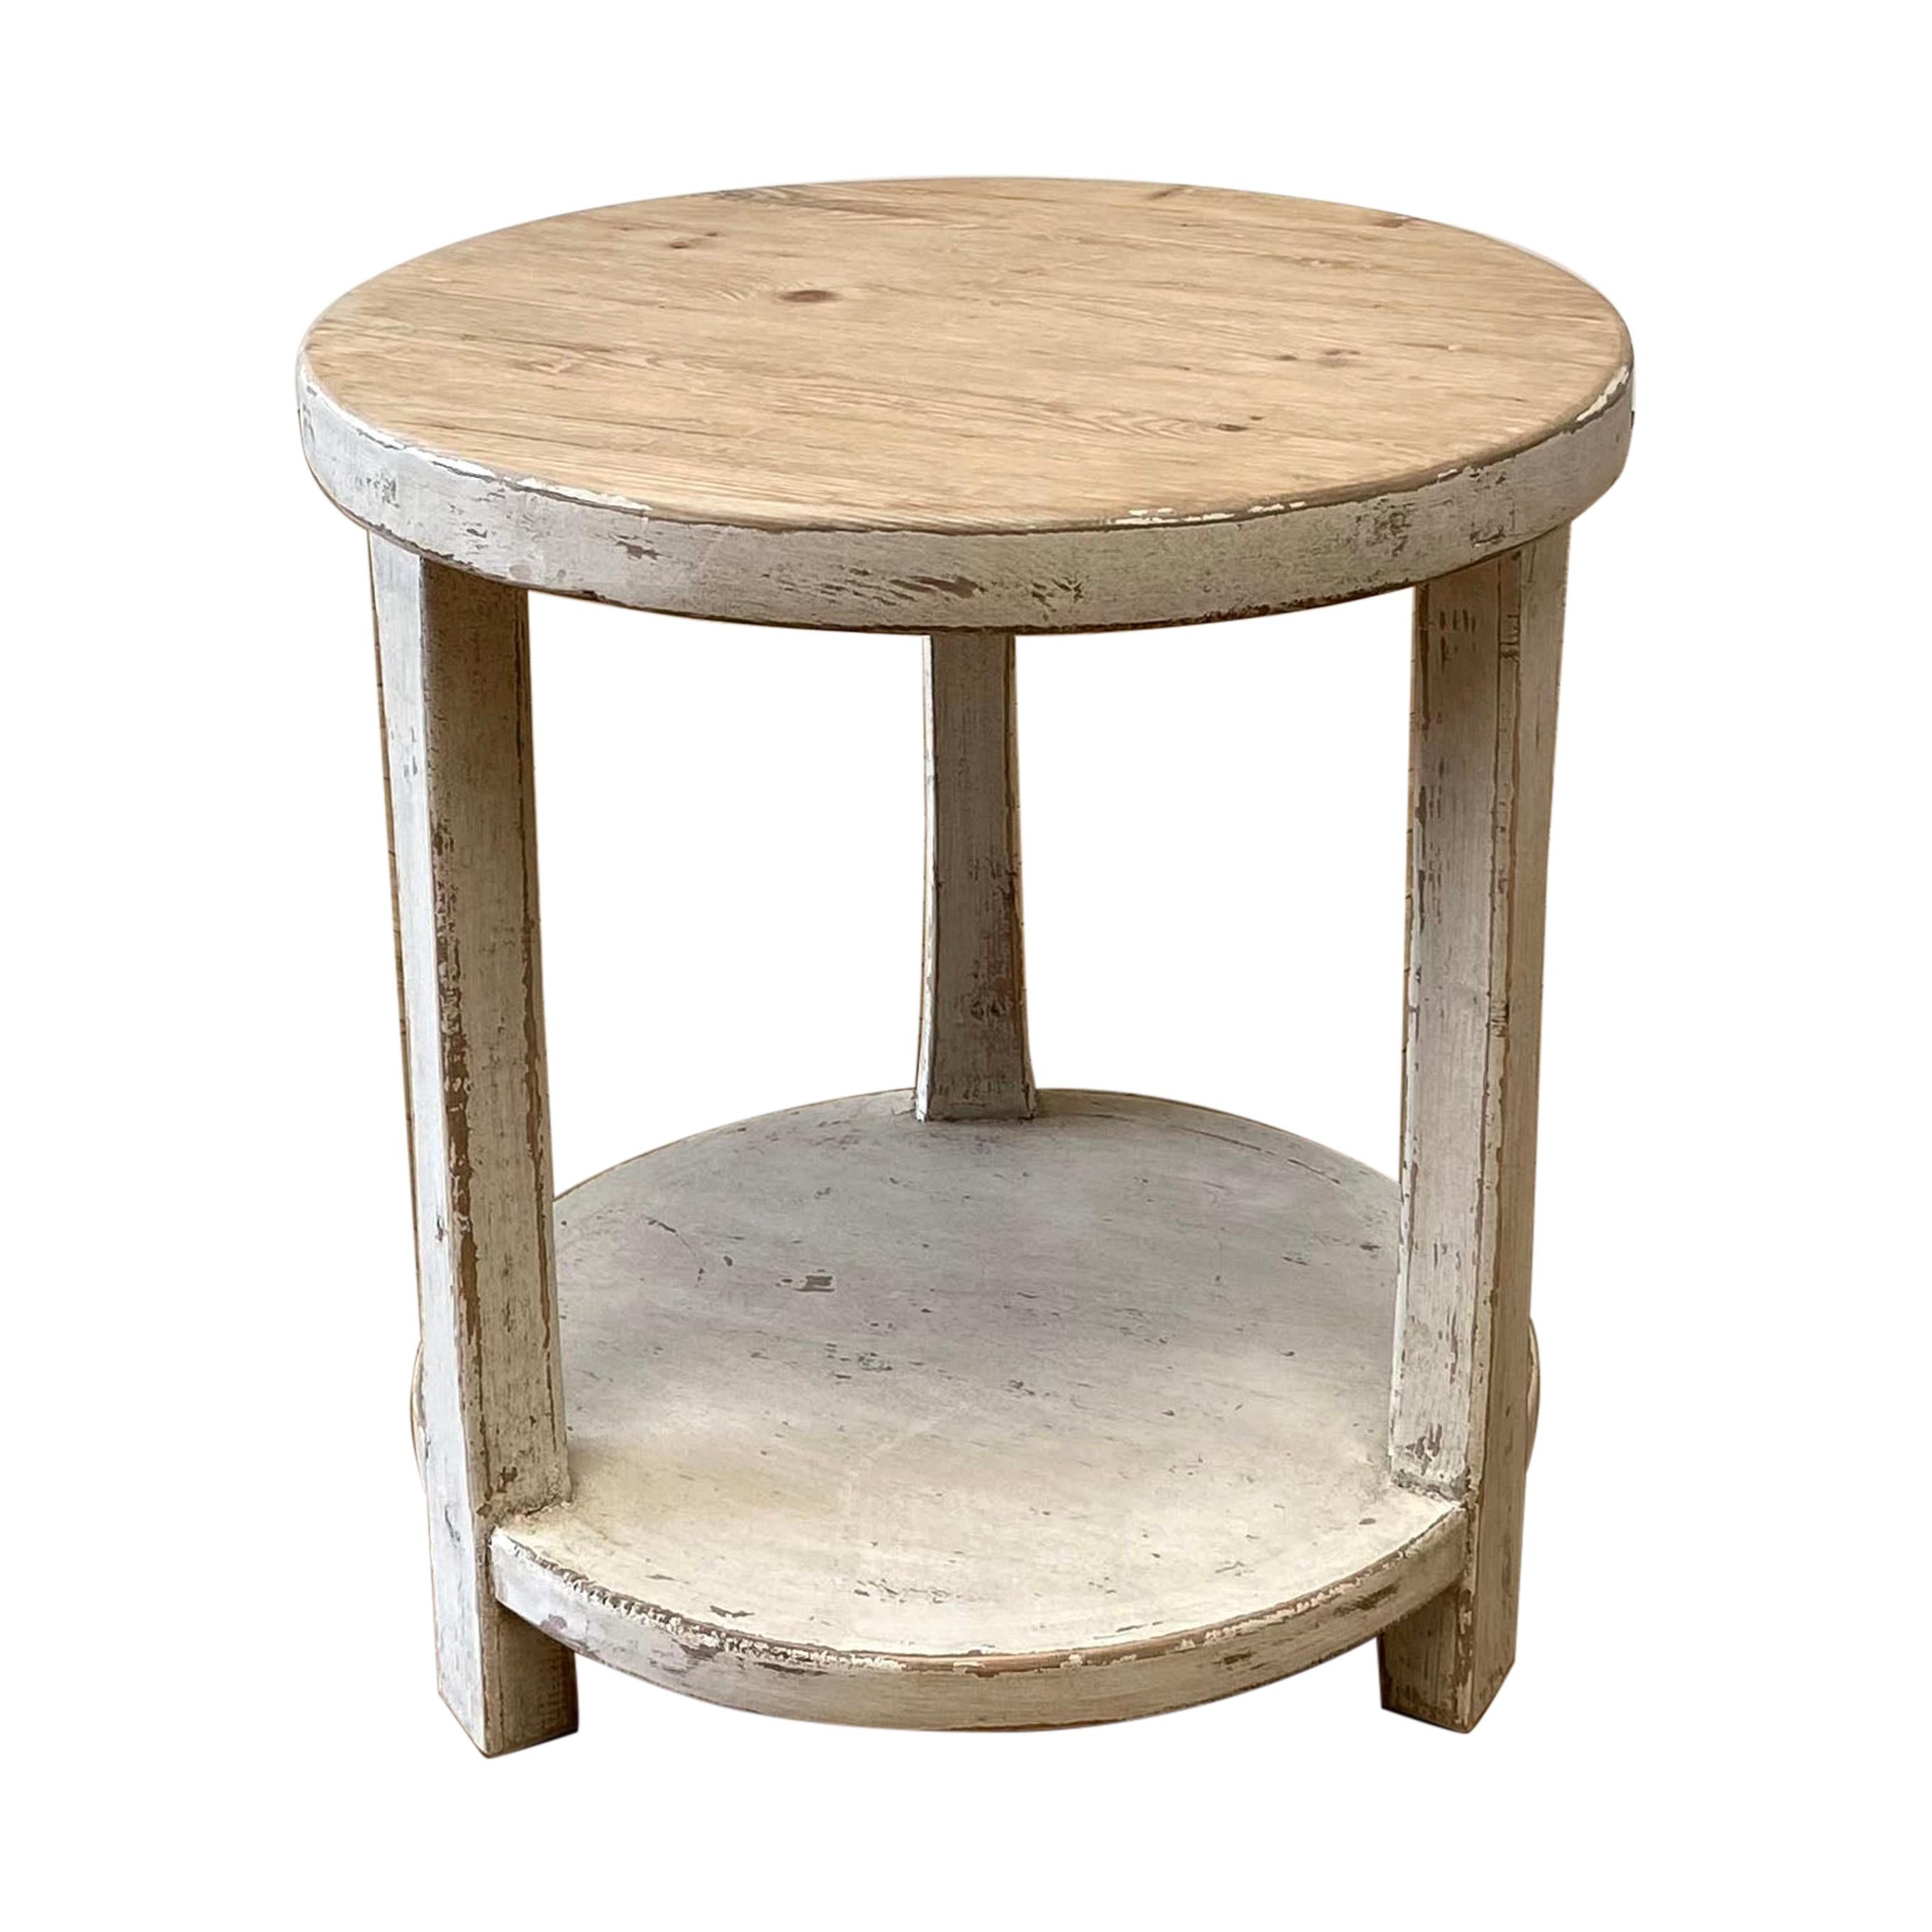 Reclaimed Pine Round Side Table with White Painted Legs For Sale at 1stDibs  | pine table white legs, reclaimed wood end table, round pine side table